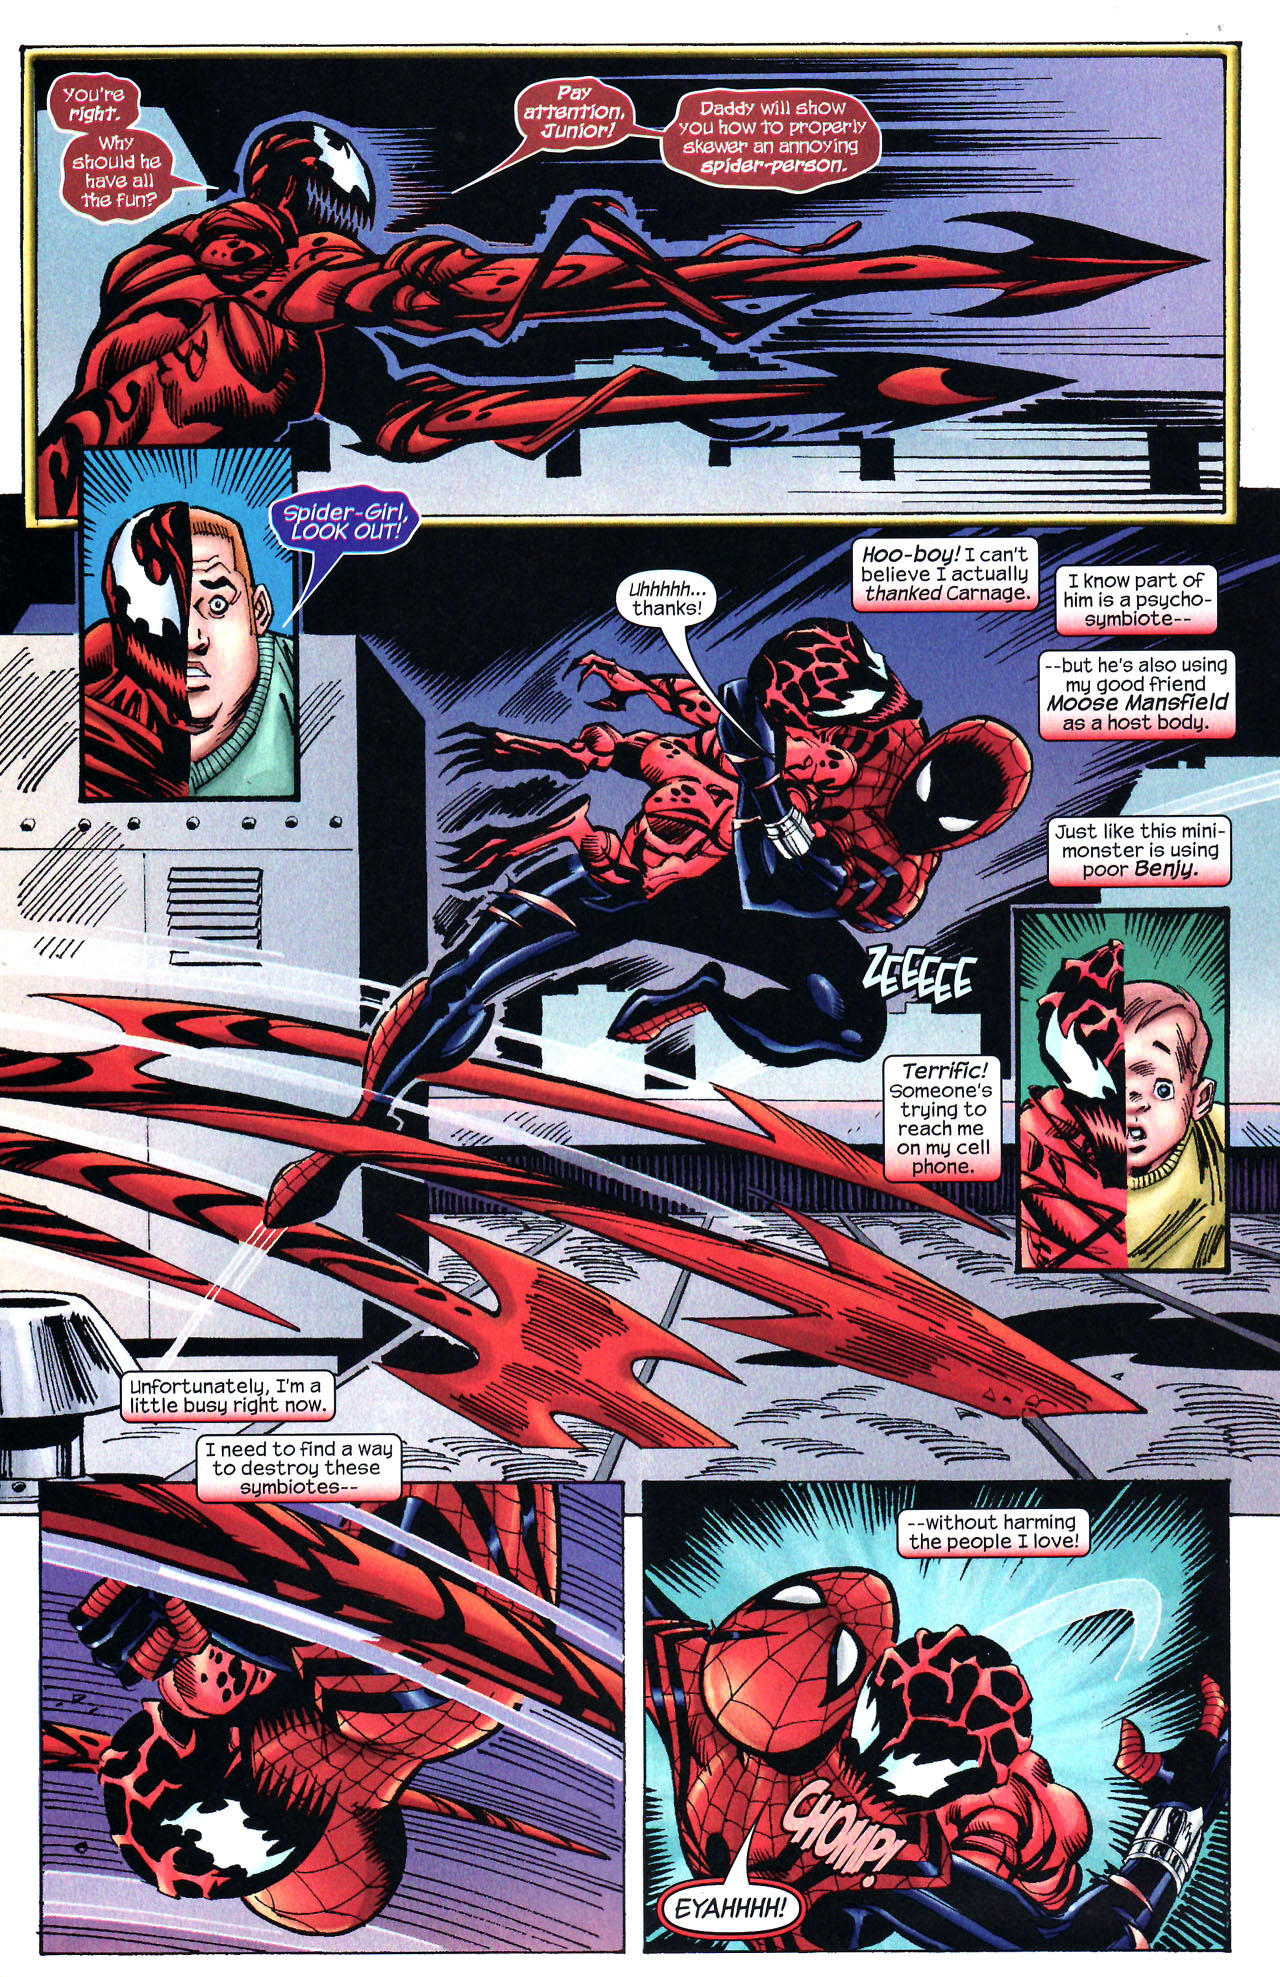 Read online Amazing Spider-Girl comic -  Issue #12 - 4